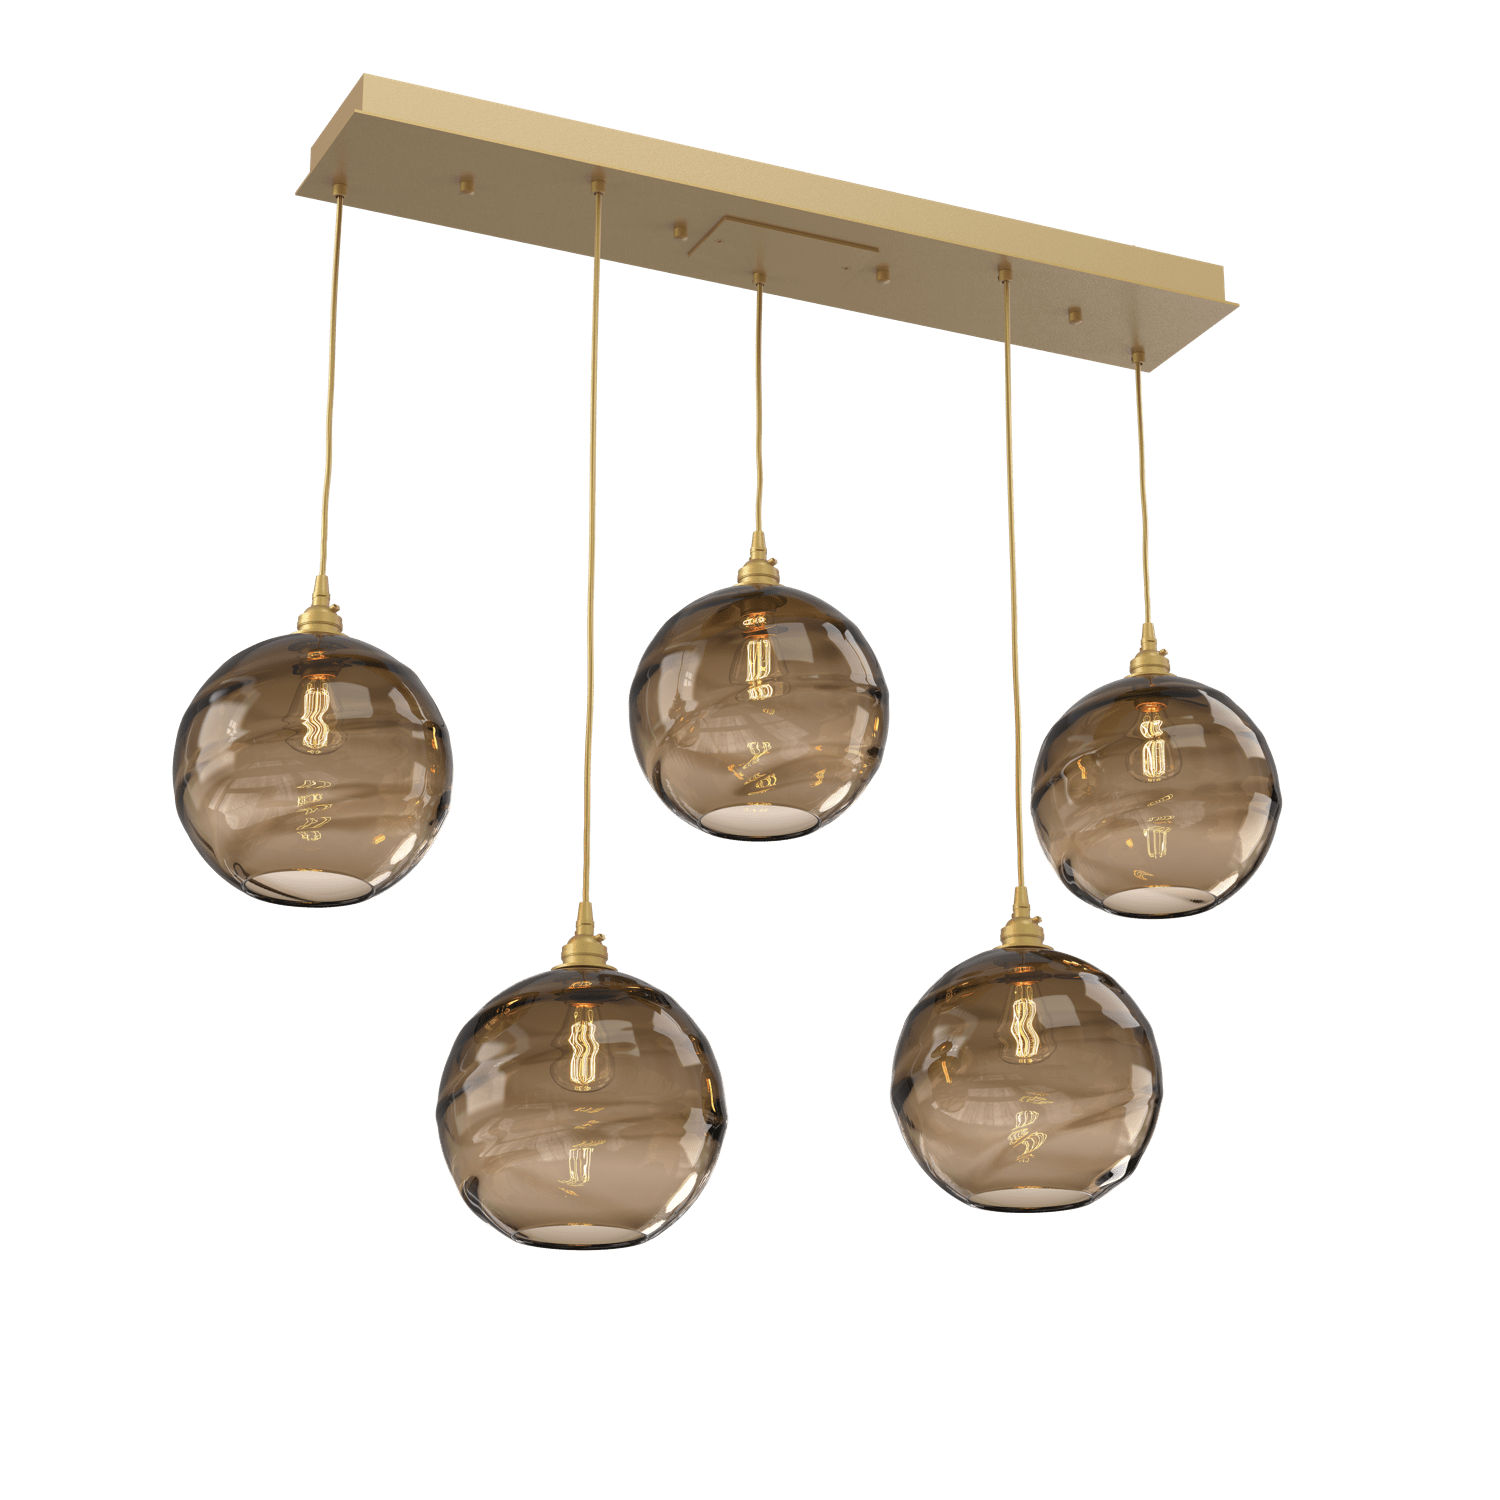 PLB0047-05-GB-OB-Hammerton-Studio-Optic-Blown-Glass-Terra-5-light-linear-pendant-chandelier-with-gilded-brass-finish-and-optic-bronze-blown-glass-shades-and-incandescent-lamping